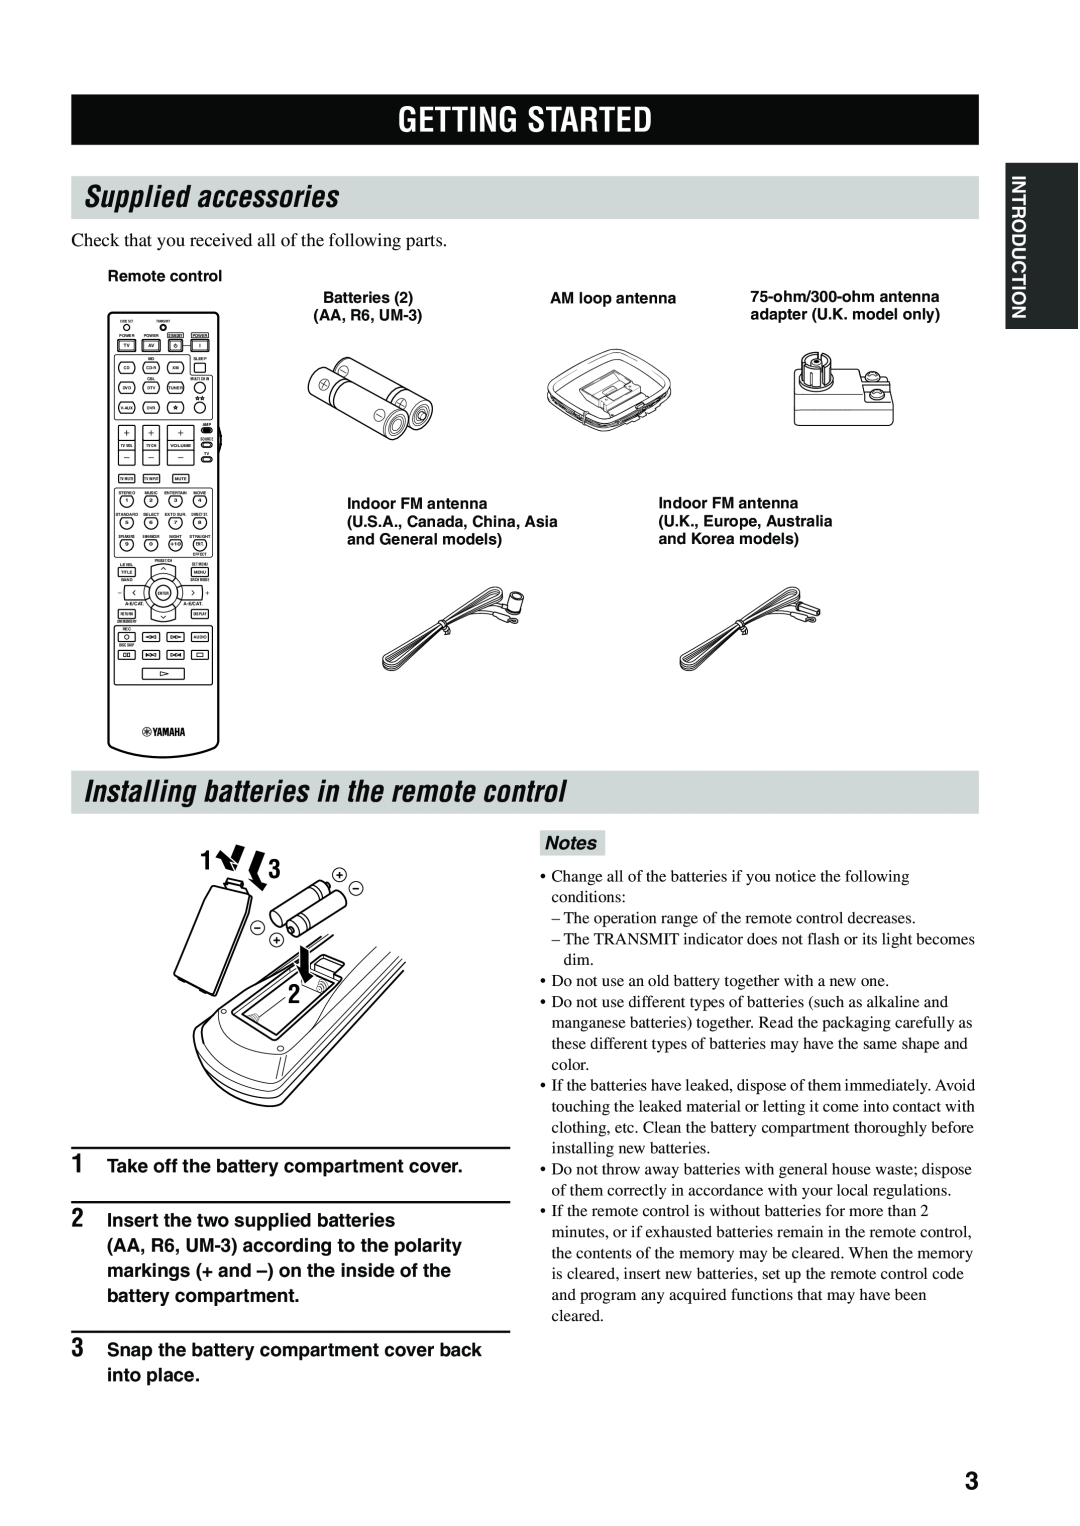 Yamaha HTR-5940 owner manual Getting Started, Supplied accessories, Installing batteries in the remote control, 13 2, Notes 